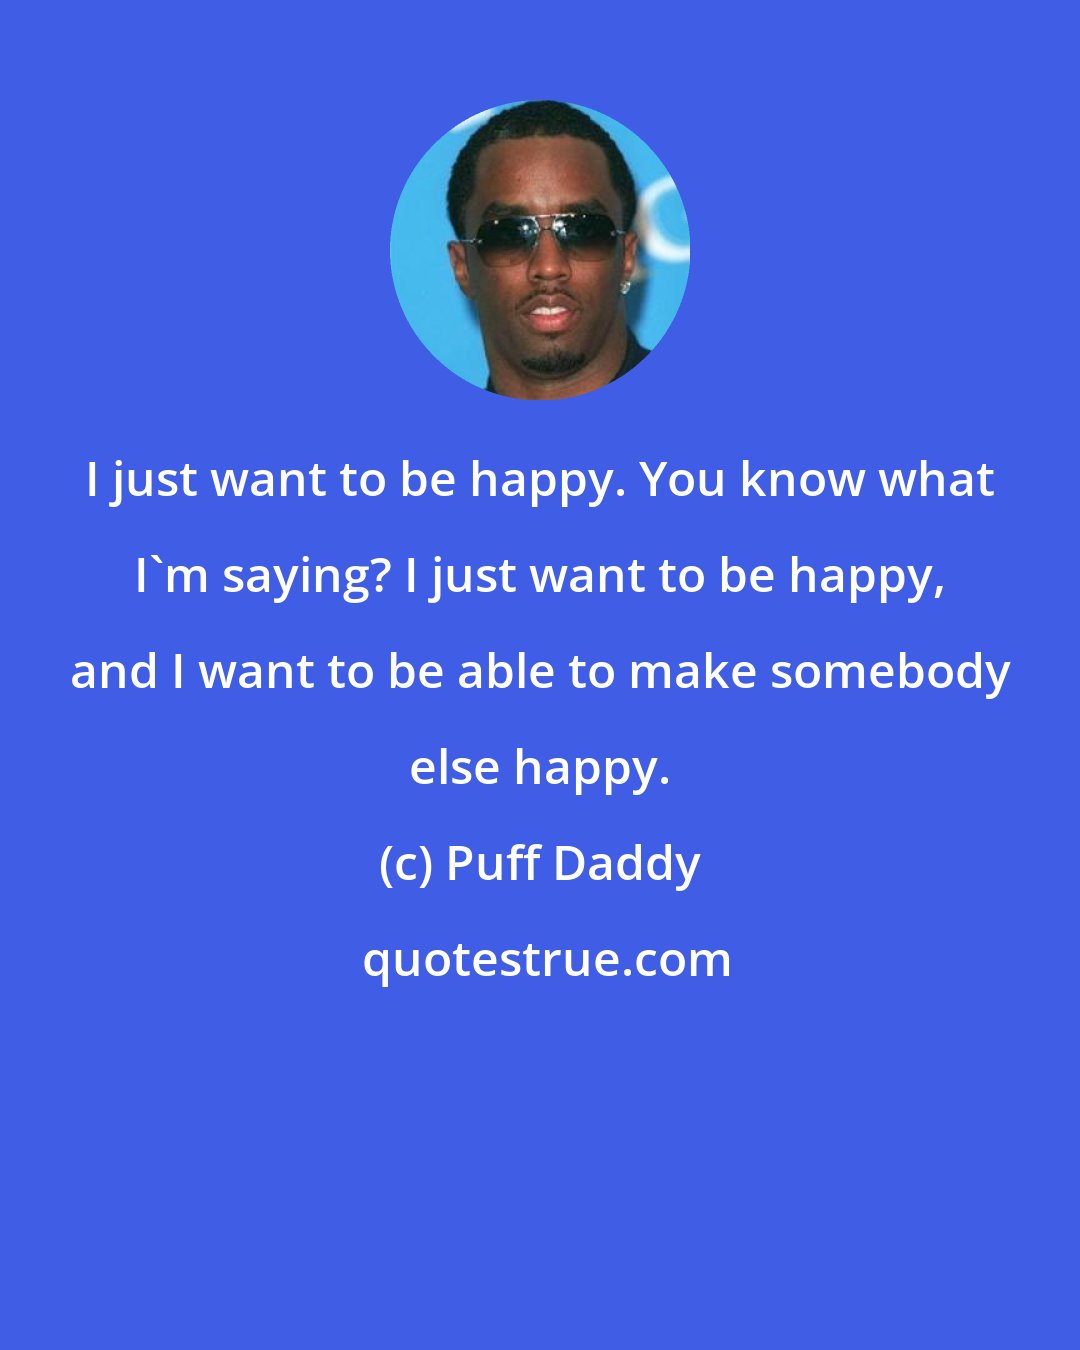 Puff Daddy: I just want to be happy. You know what I'm saying? I just want to be happy, and I want to be able to make somebody else happy.